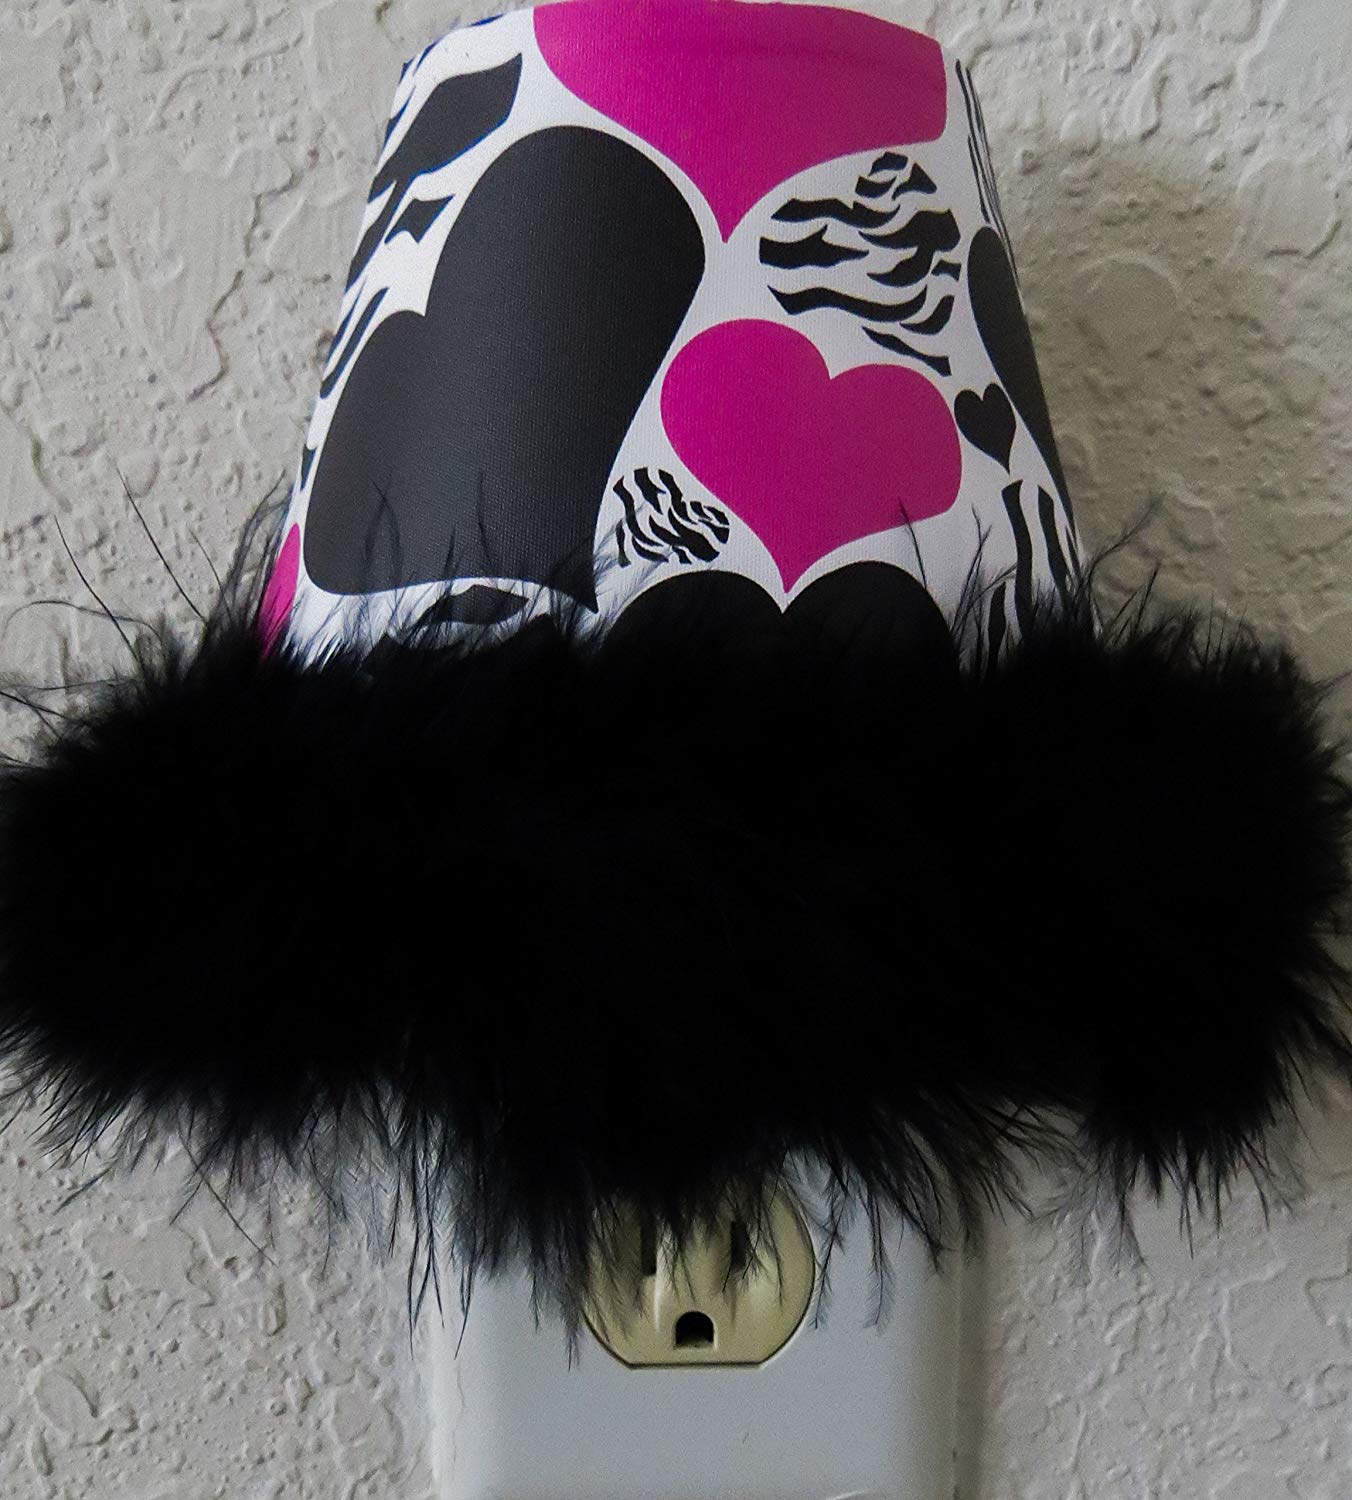 Zebra Priint Heart Night Lights in Hot Pink and Black with a Black Boa At Bottom